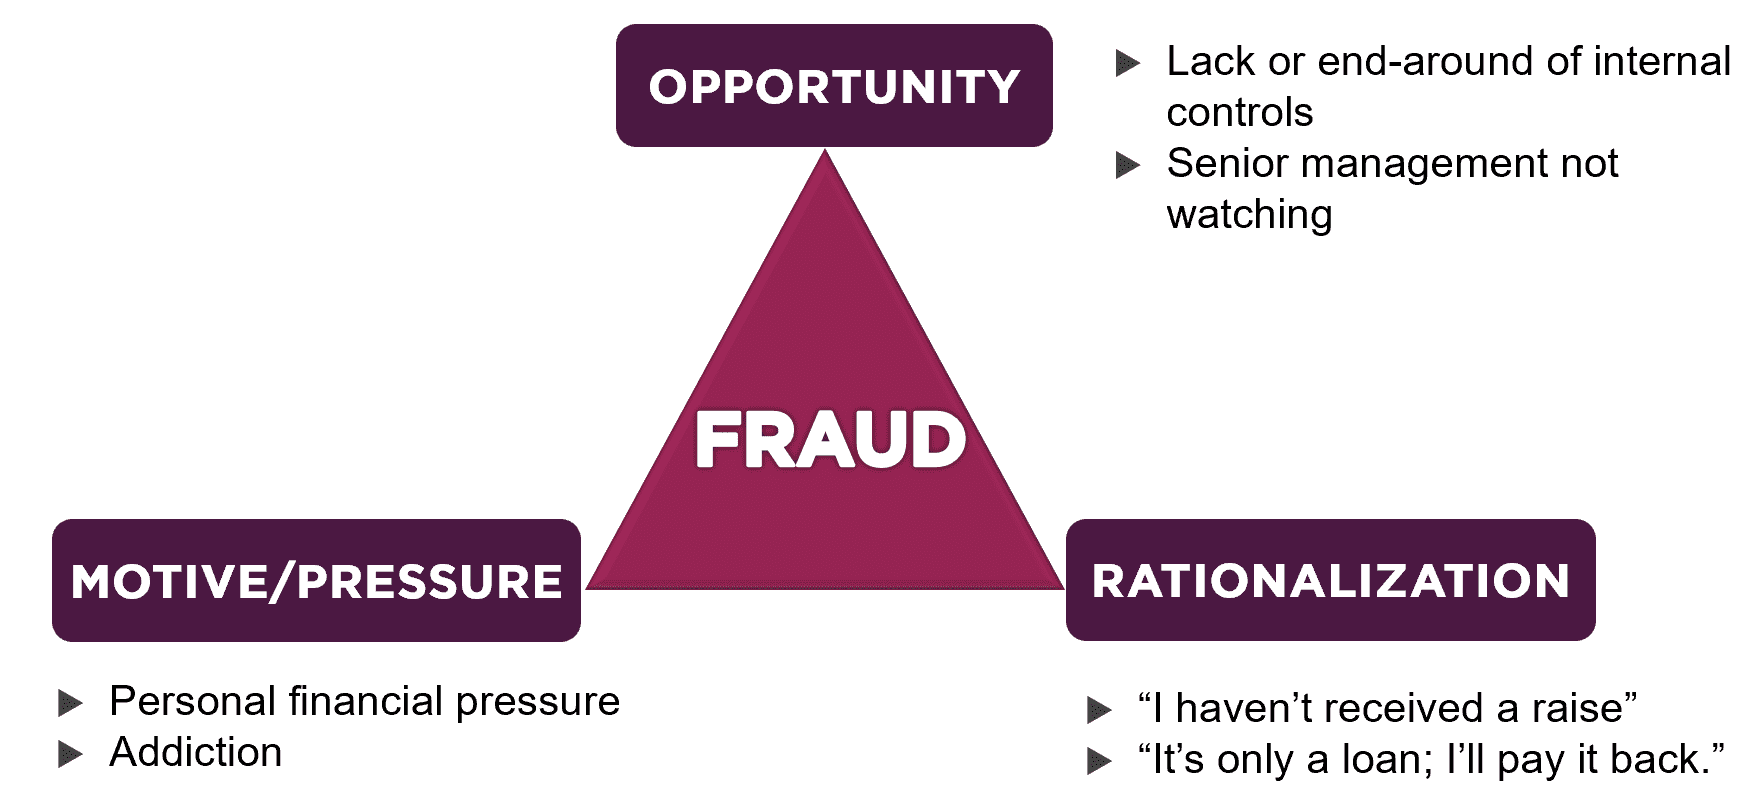 Fraud Triangle - St Louis CPA Firm